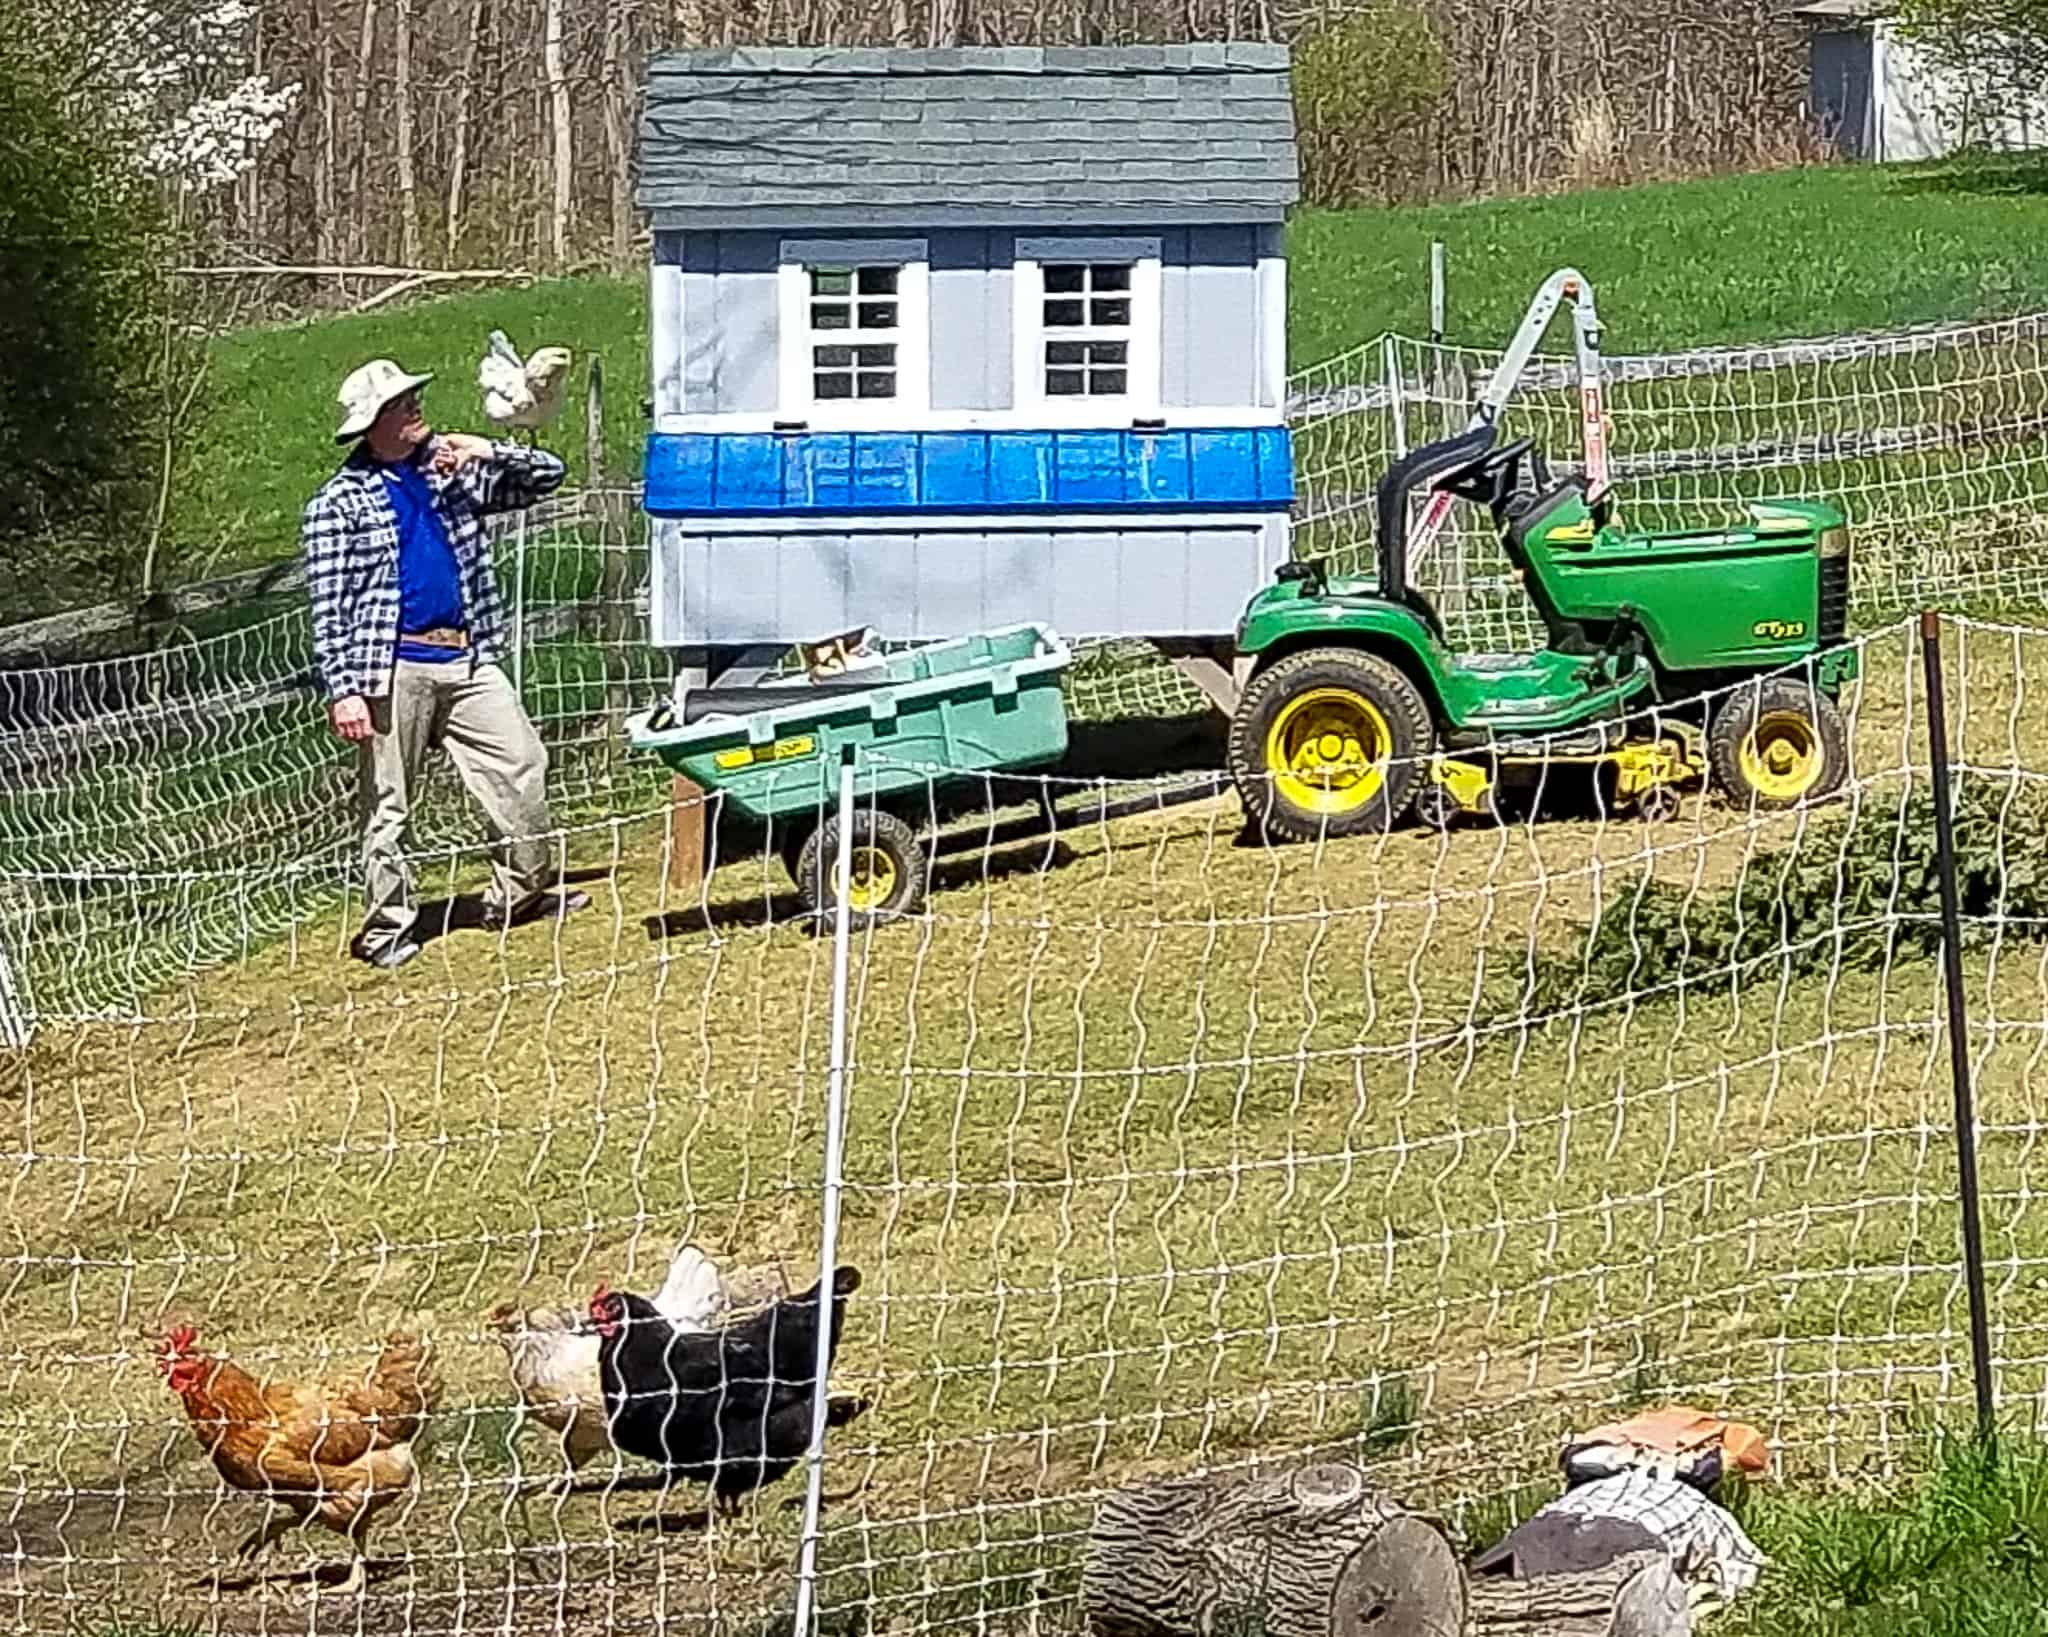 Snowball, the Easter Egger Hen on her favorite human's arm post coop build next to coop with John Deere and chickens inside fenced area. 